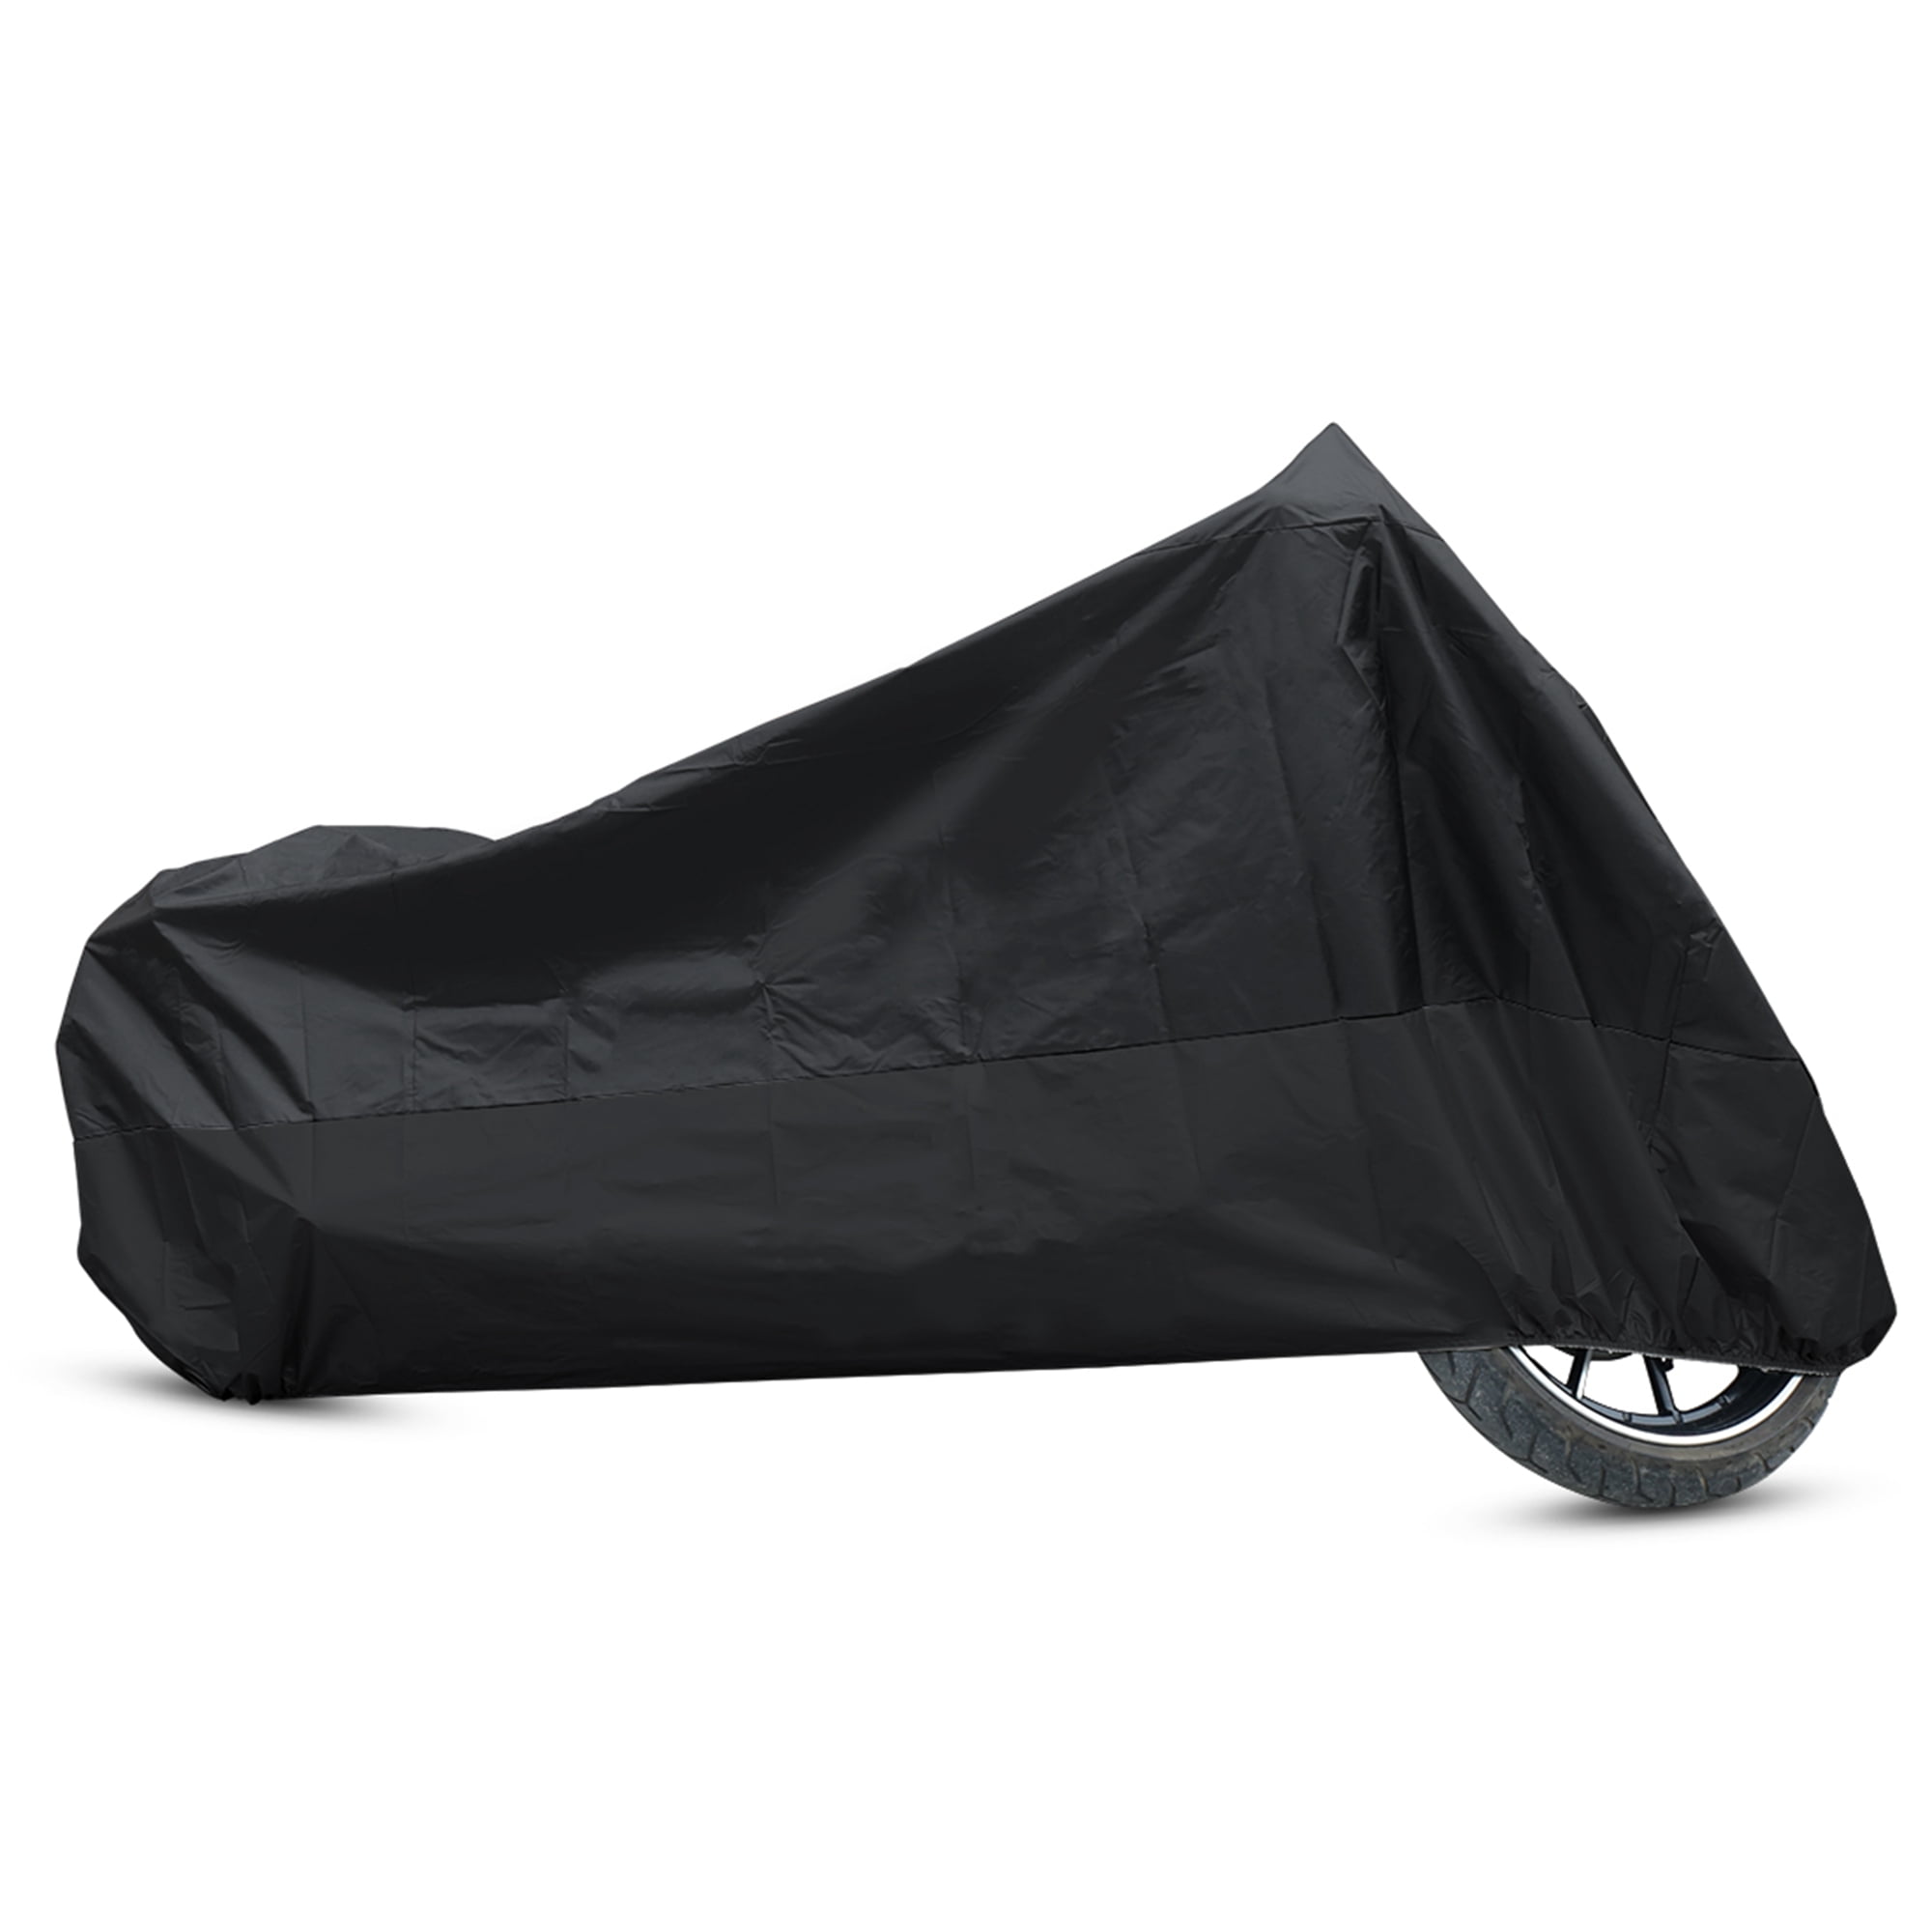 91*50" Motorcycle Bike Cover Water Dust proof Anti-UV Outdoor Tricycle Cover+Bag 